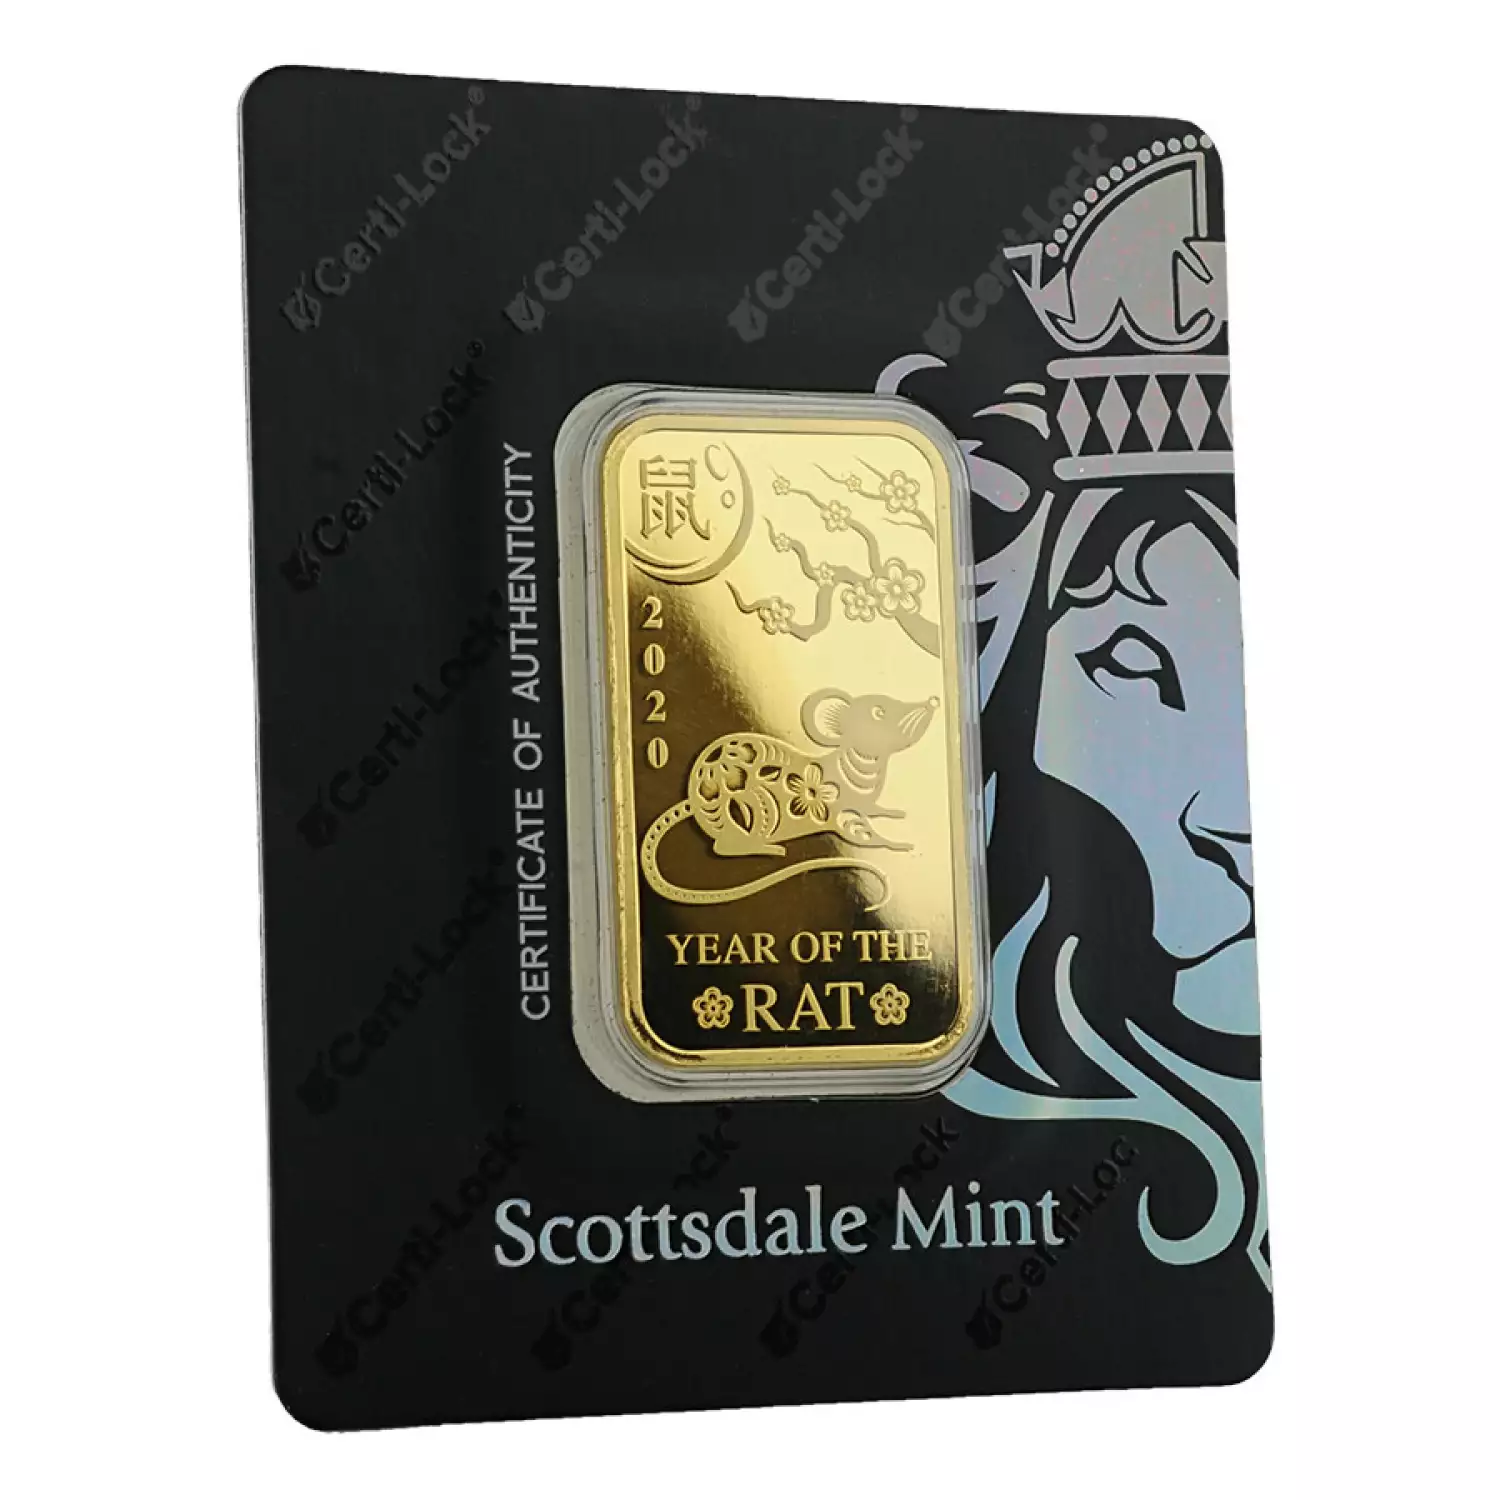 1oz Scottsdale minted Gold Bar - Year of the Rat (2)